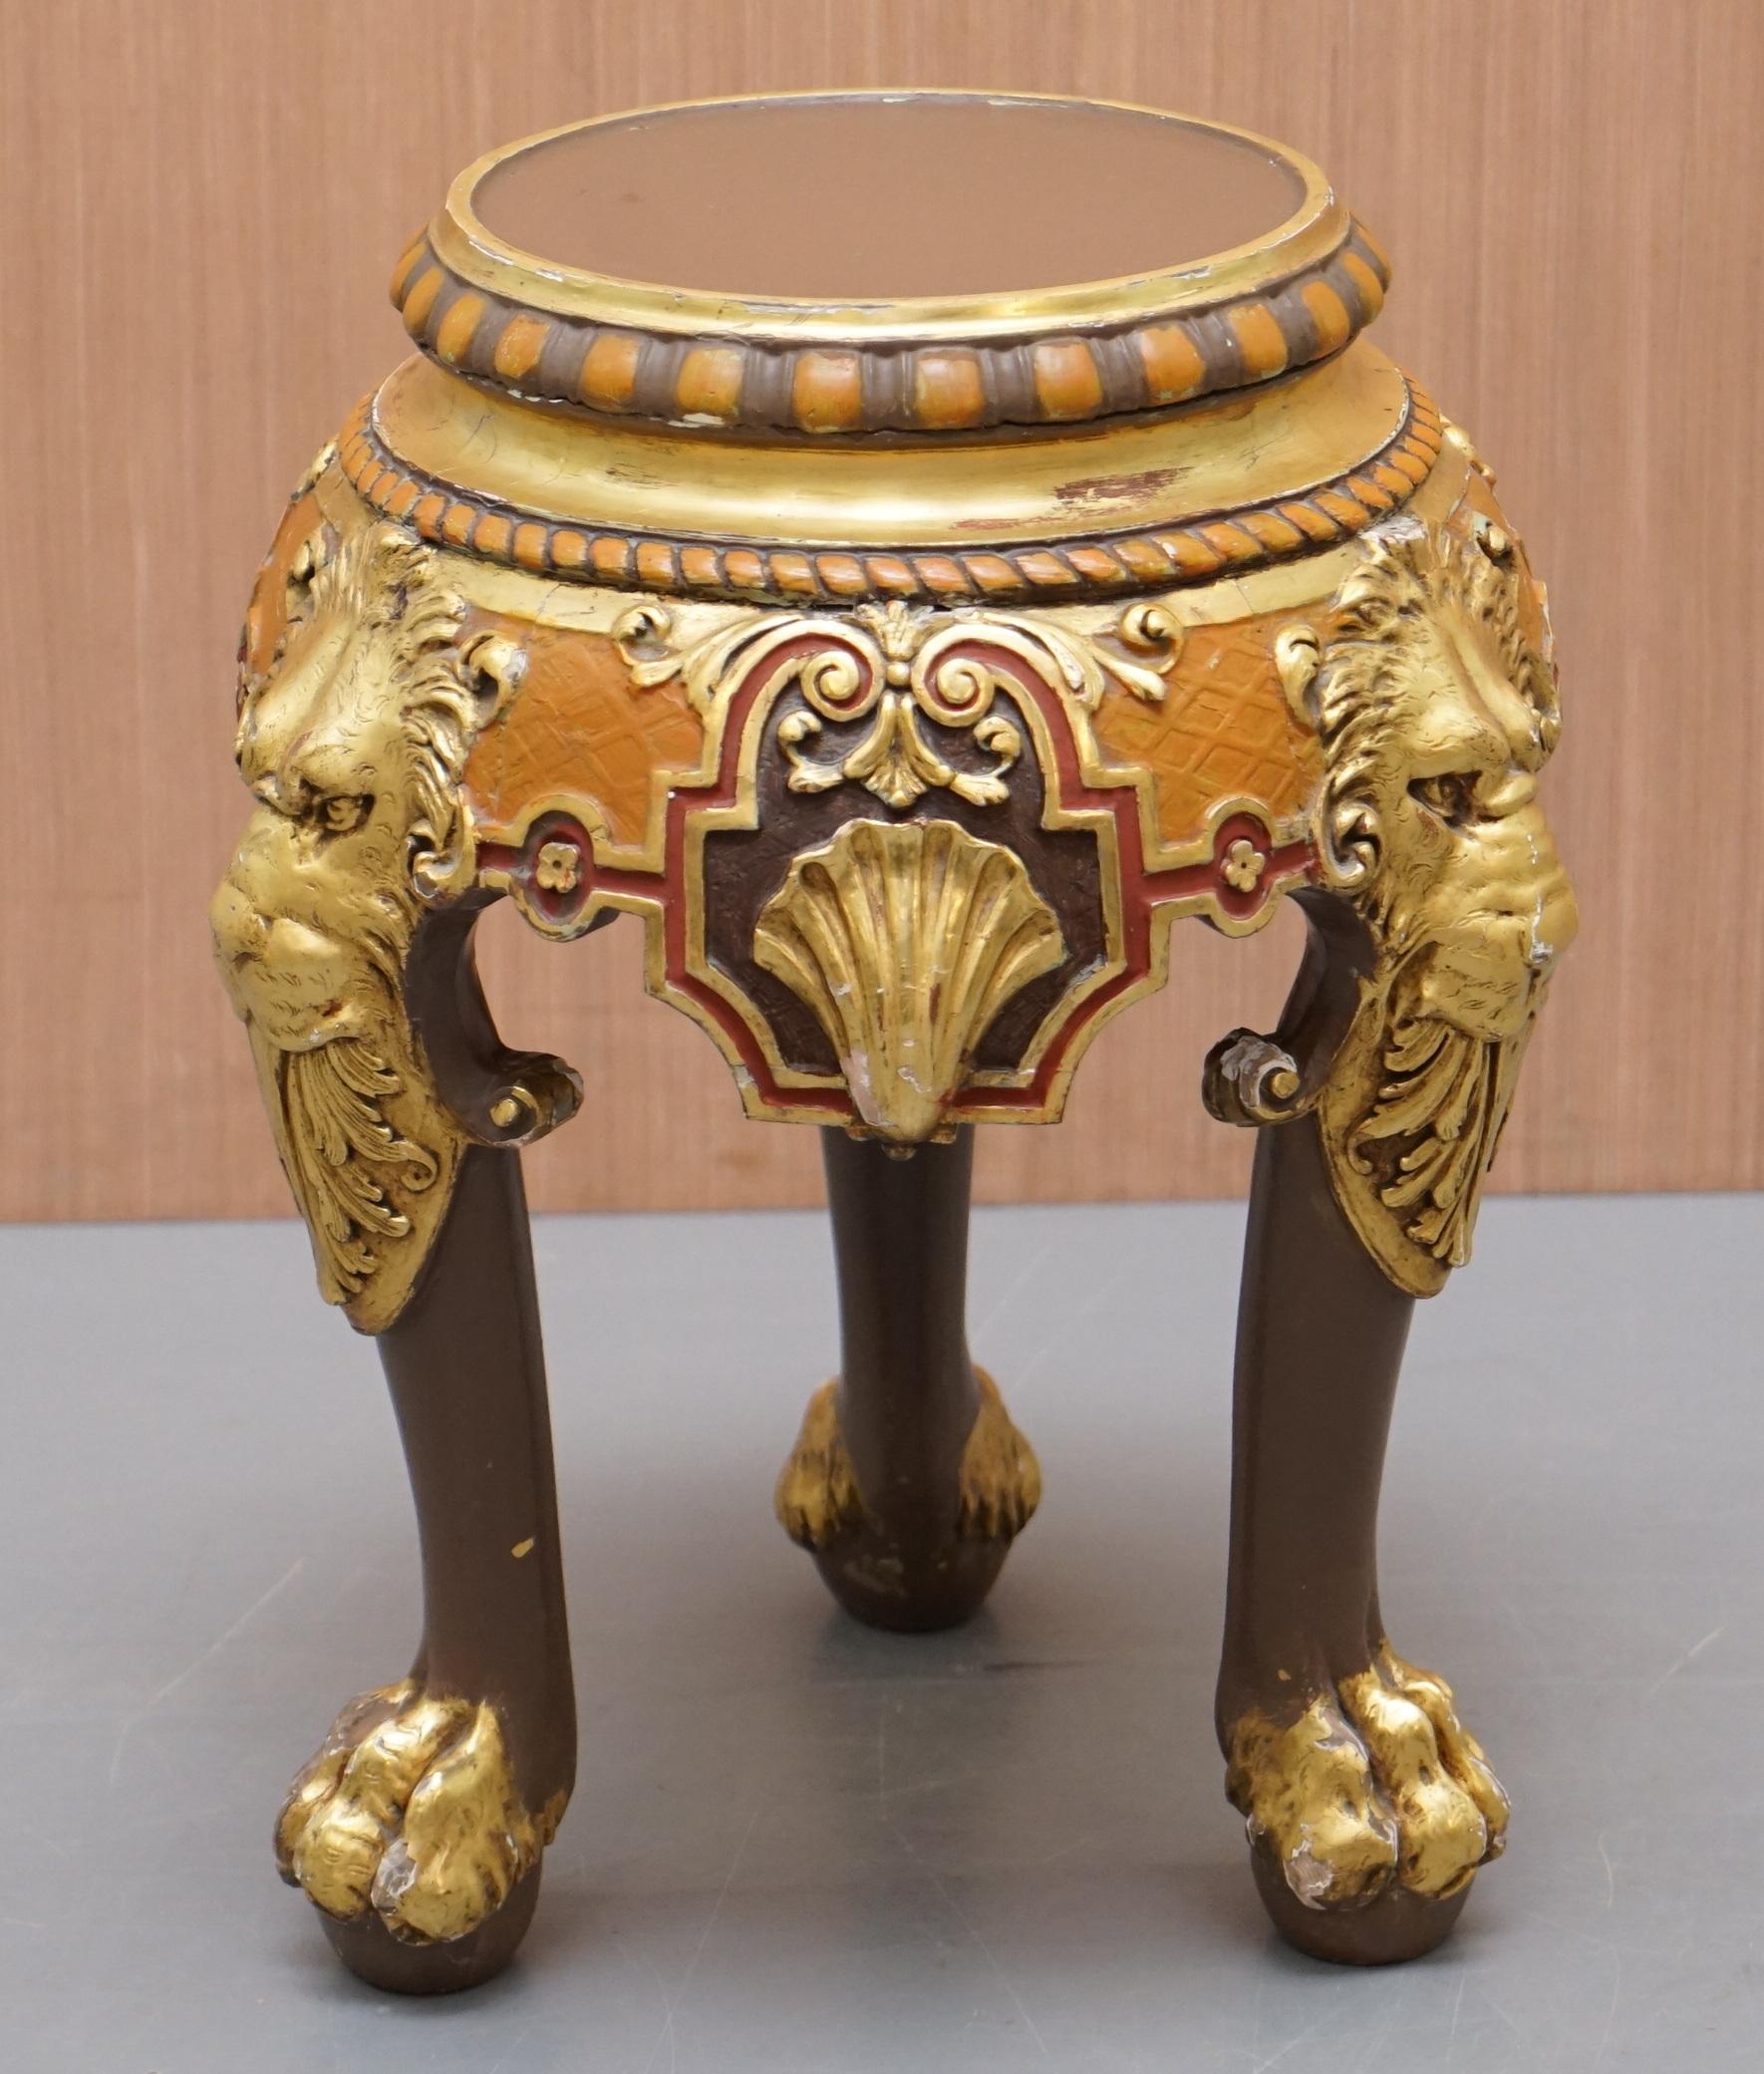 We are delighted to offer for sale this stunning hand carved plant or Jardinière stand with over sized Lions head, hairy paw feet and acanthus leaves finished hand painting

A good looking and very decorative piece, ideally suite to display busts,